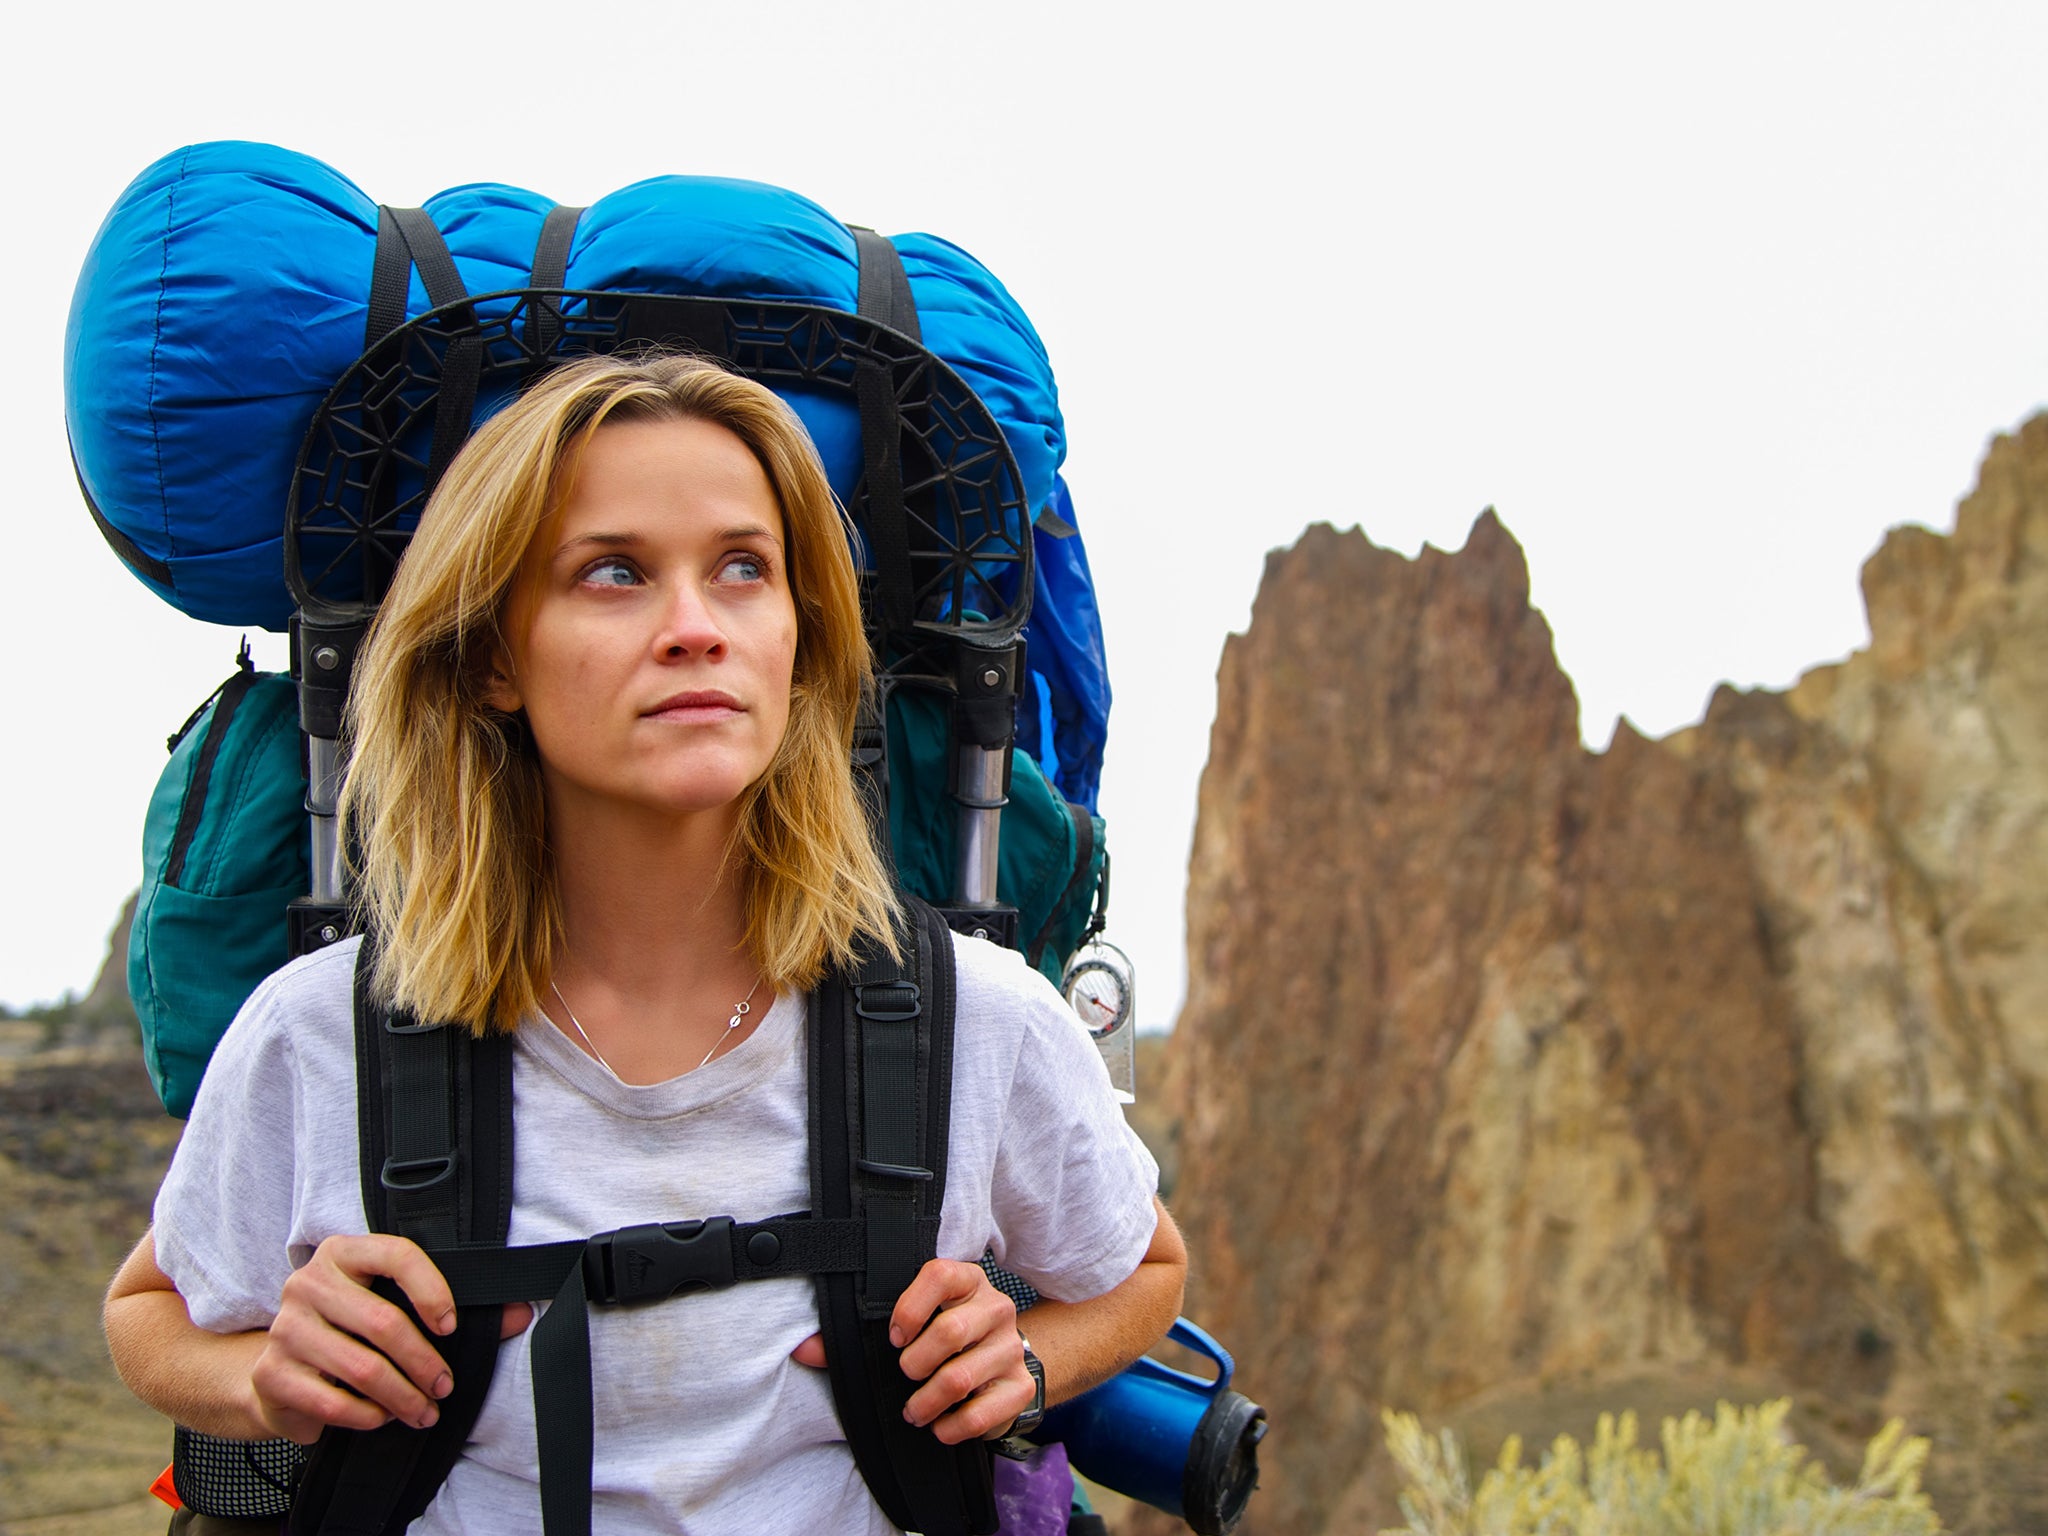 Reese Witherspoon hikes her way to recovery in ‘Wild’